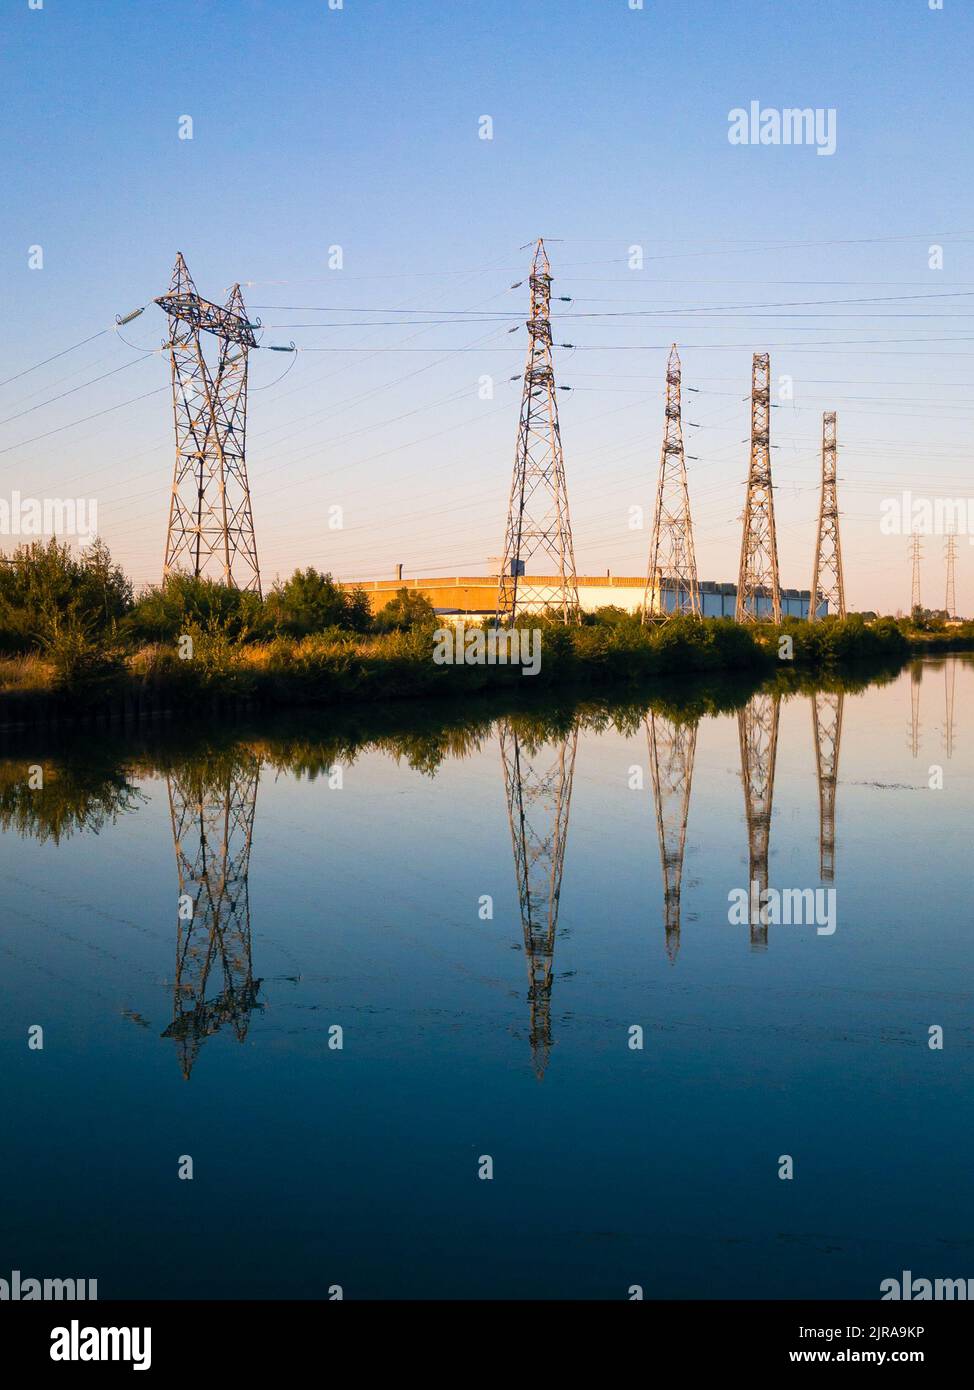 A row of metallic transmission towers of various shapes reflecting in the still water of a canal against blue sky at dusk. Stock Photo